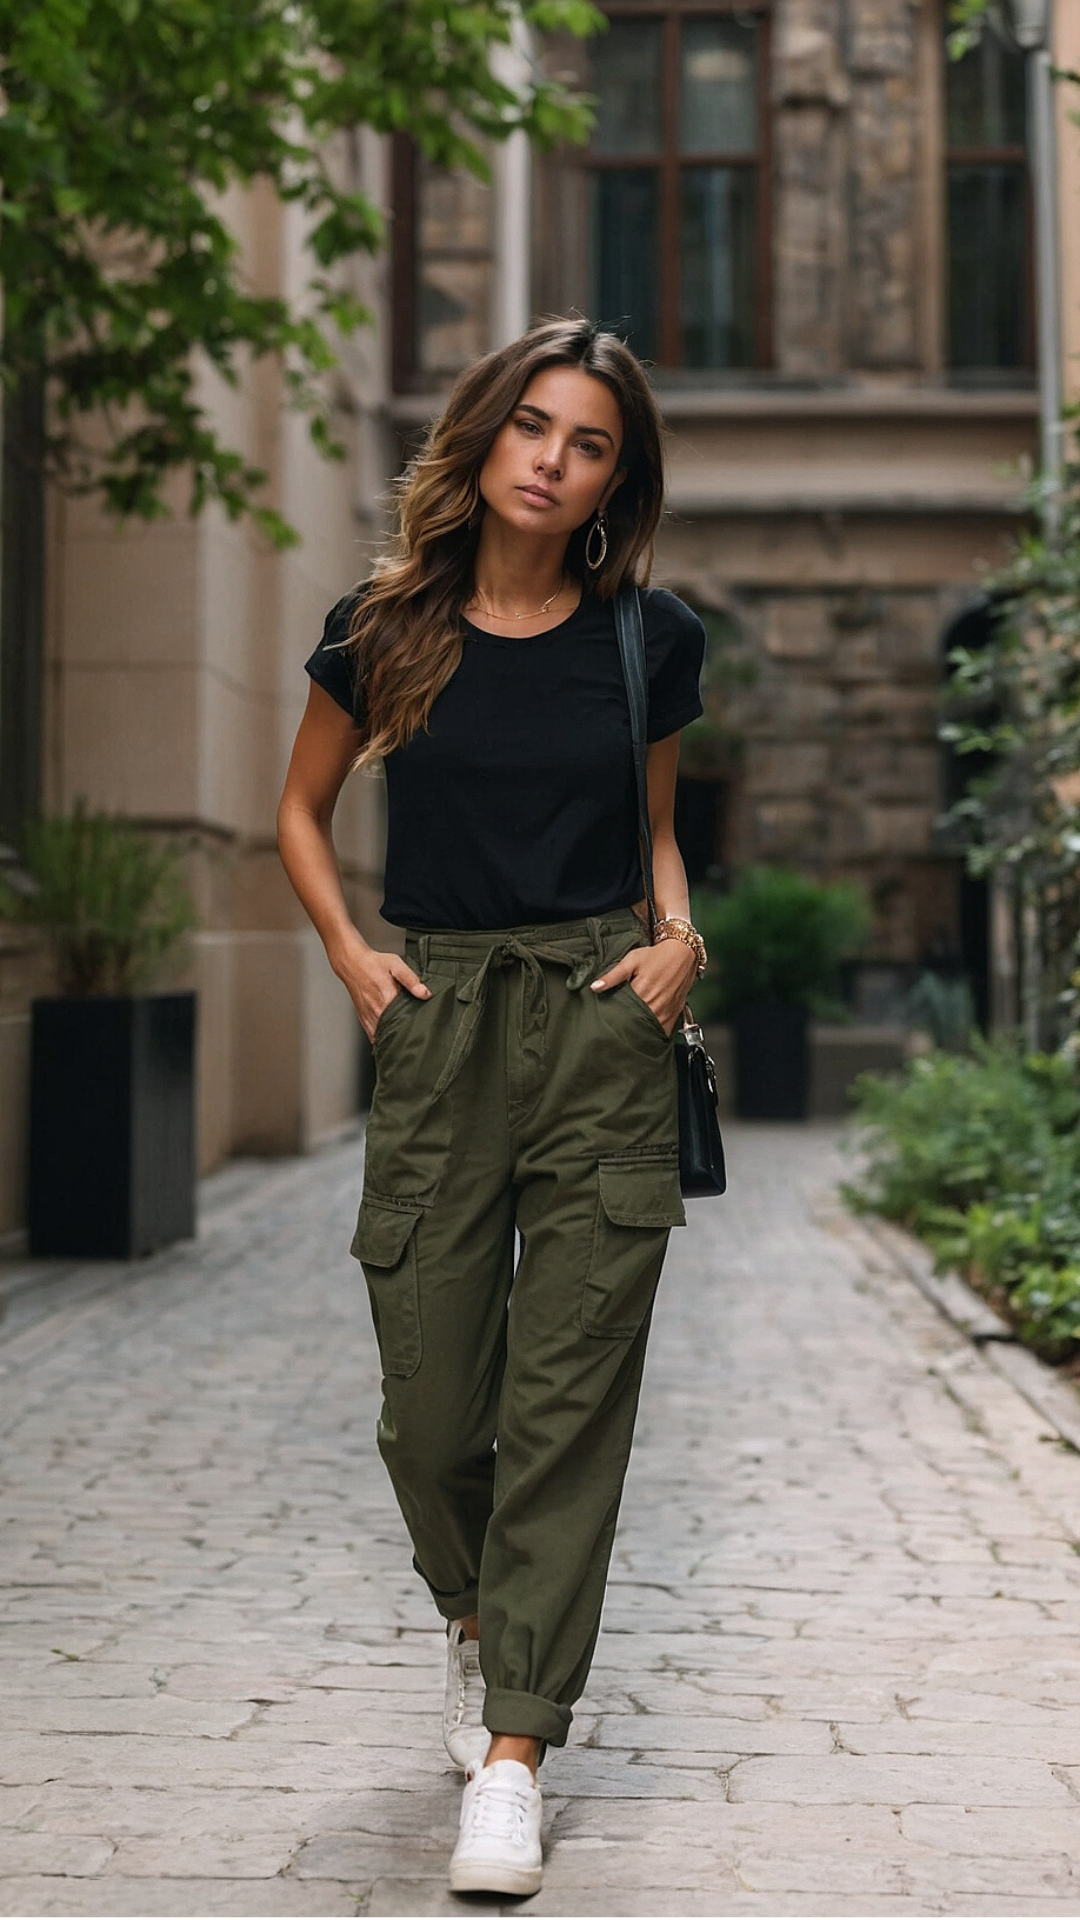 Laid-back Luxury: Comfy Women's Street Outfits